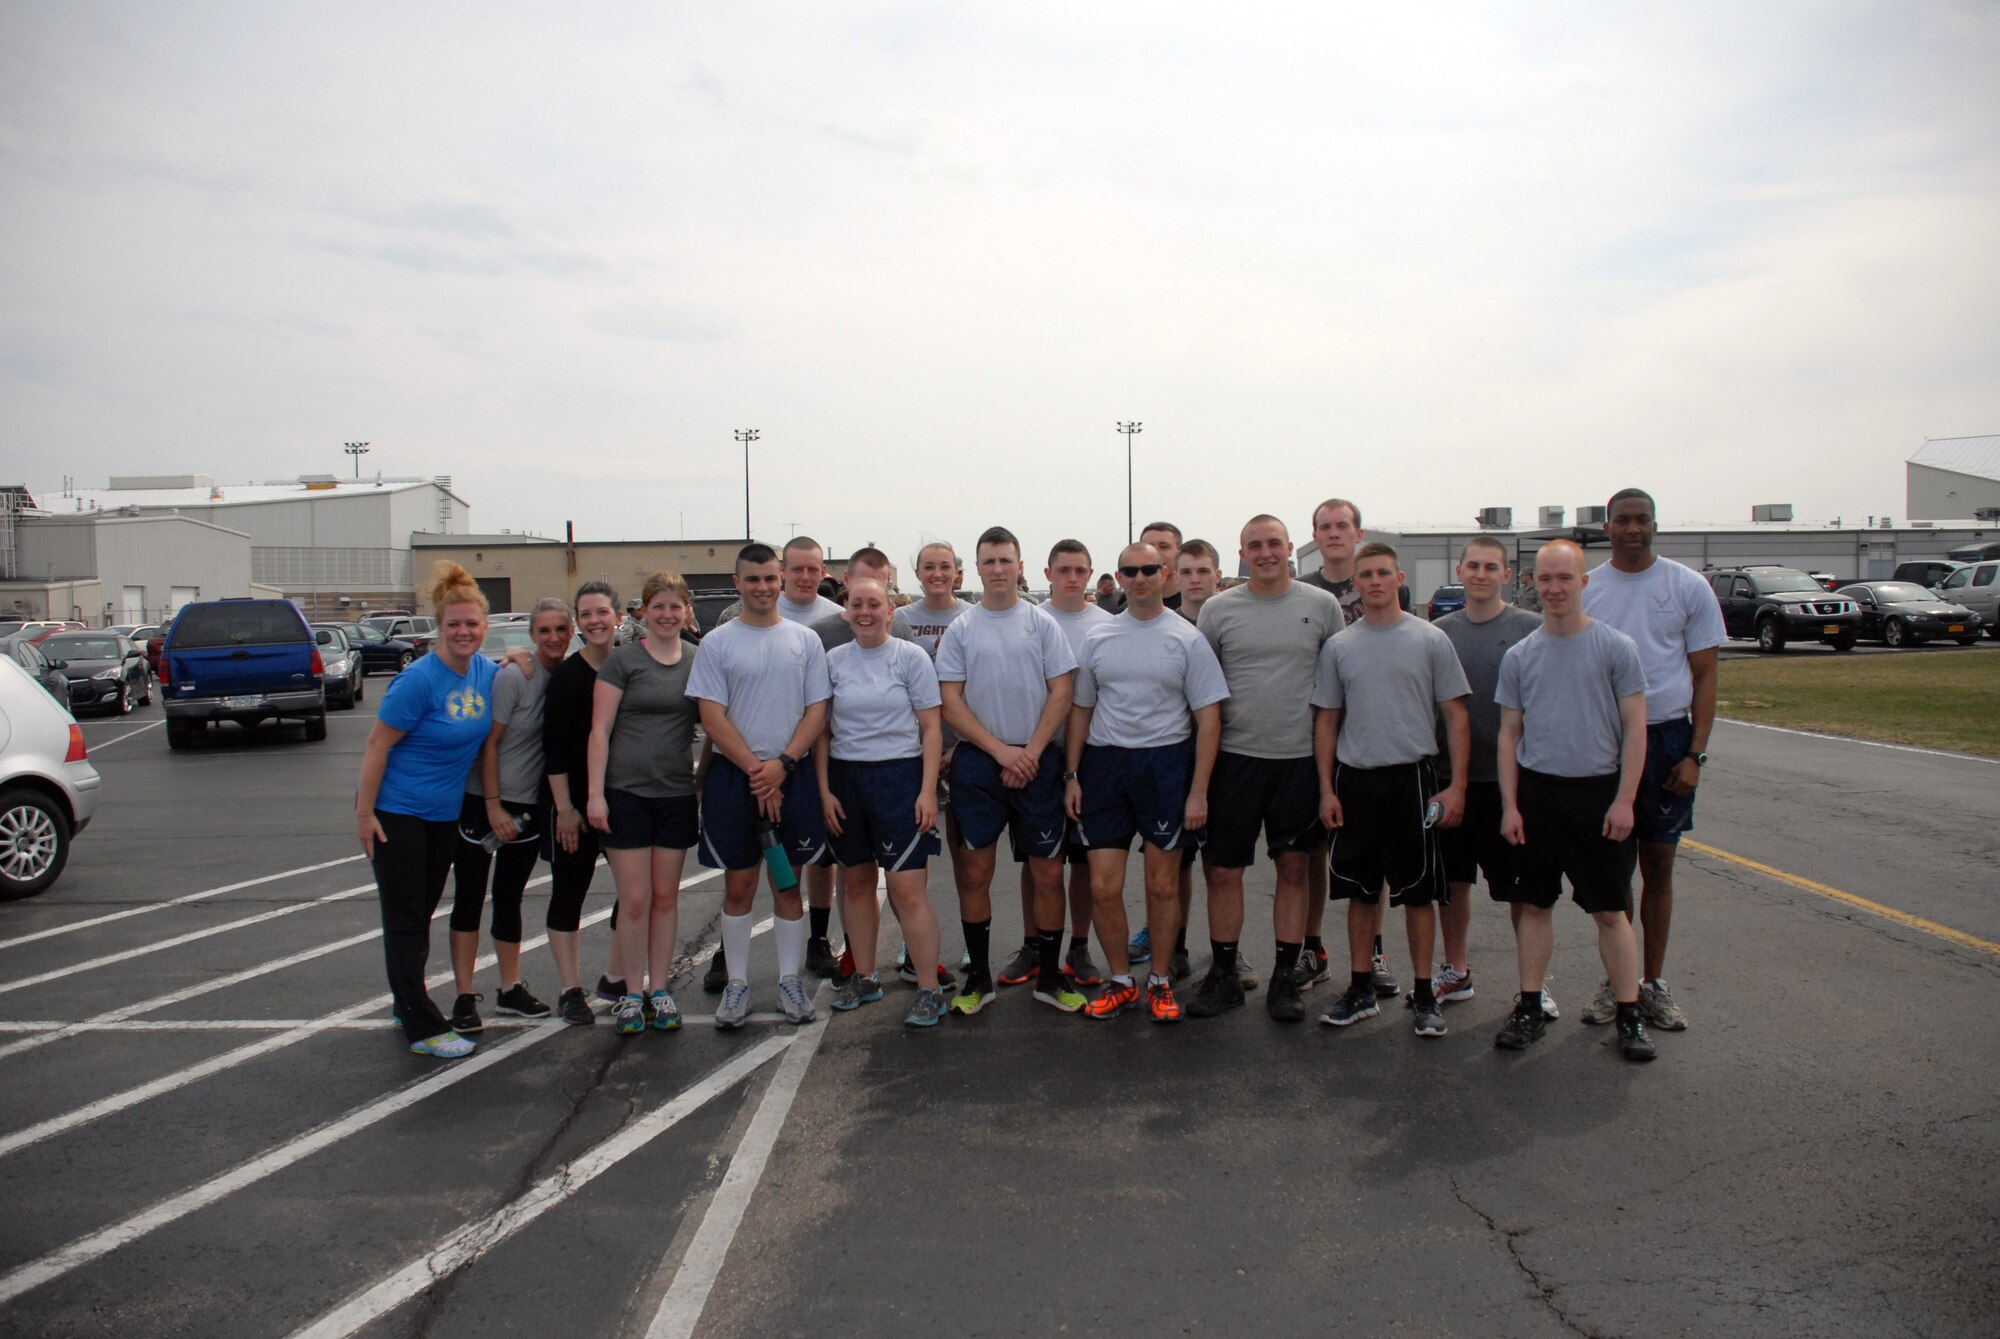 Members of the 107th AW student flight assemble before the start of the “Walk A Mile” Sexual Assault Awareness Walk held here April 13, 2014. (U.S. Air National Guard photo/Senior Airman Daniel Fravel)